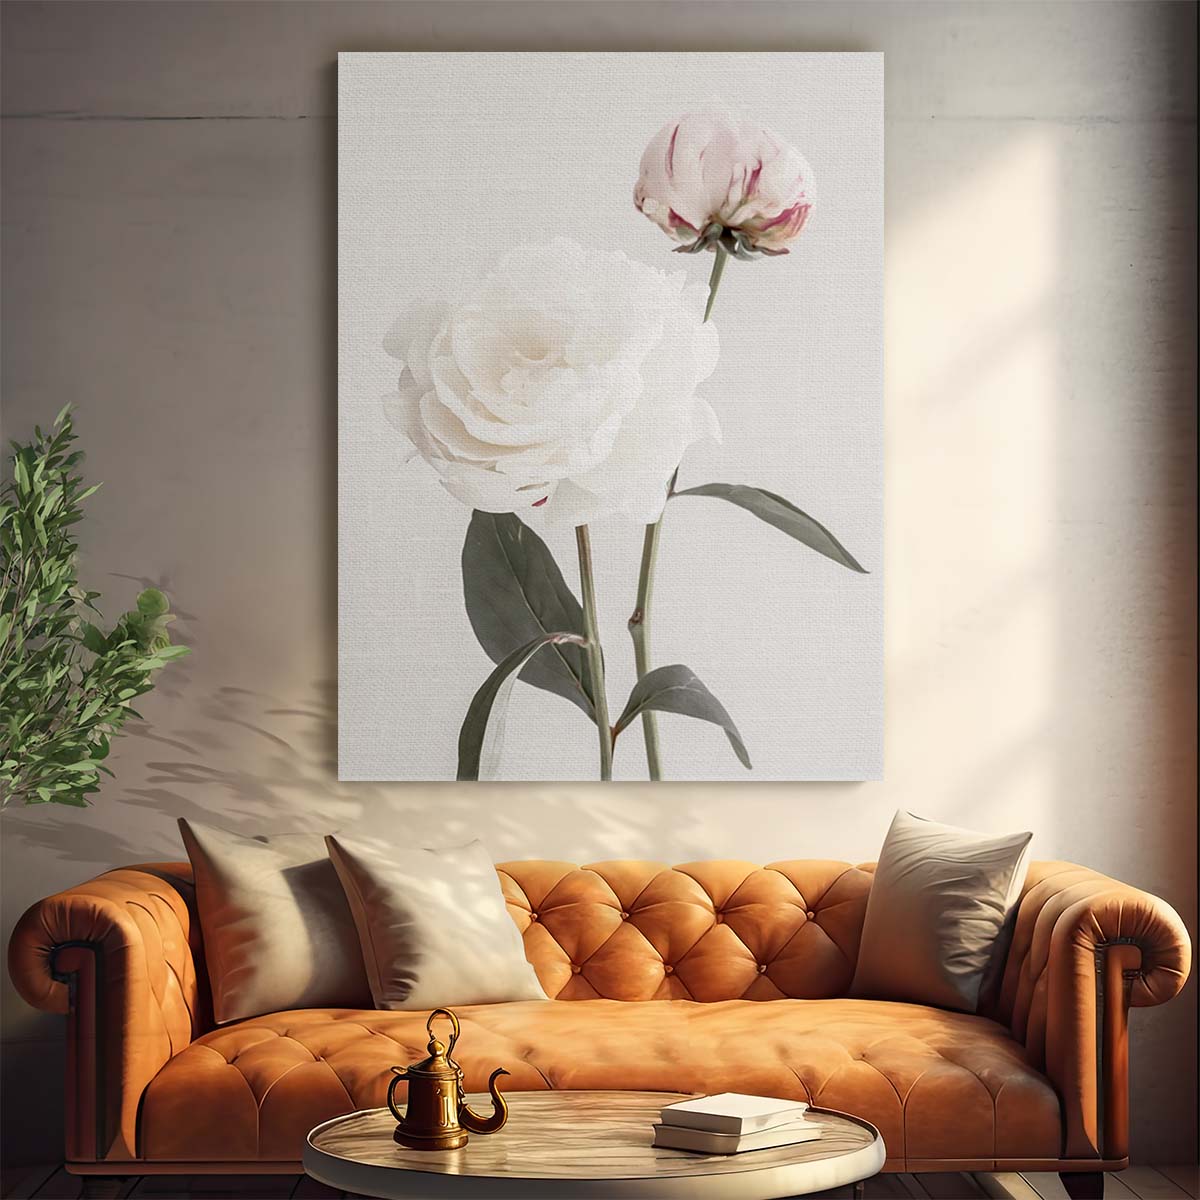 Botanical Pink Peony Blossom Photography - Still Life Floral Art by Luxuriance Designs, made in USA